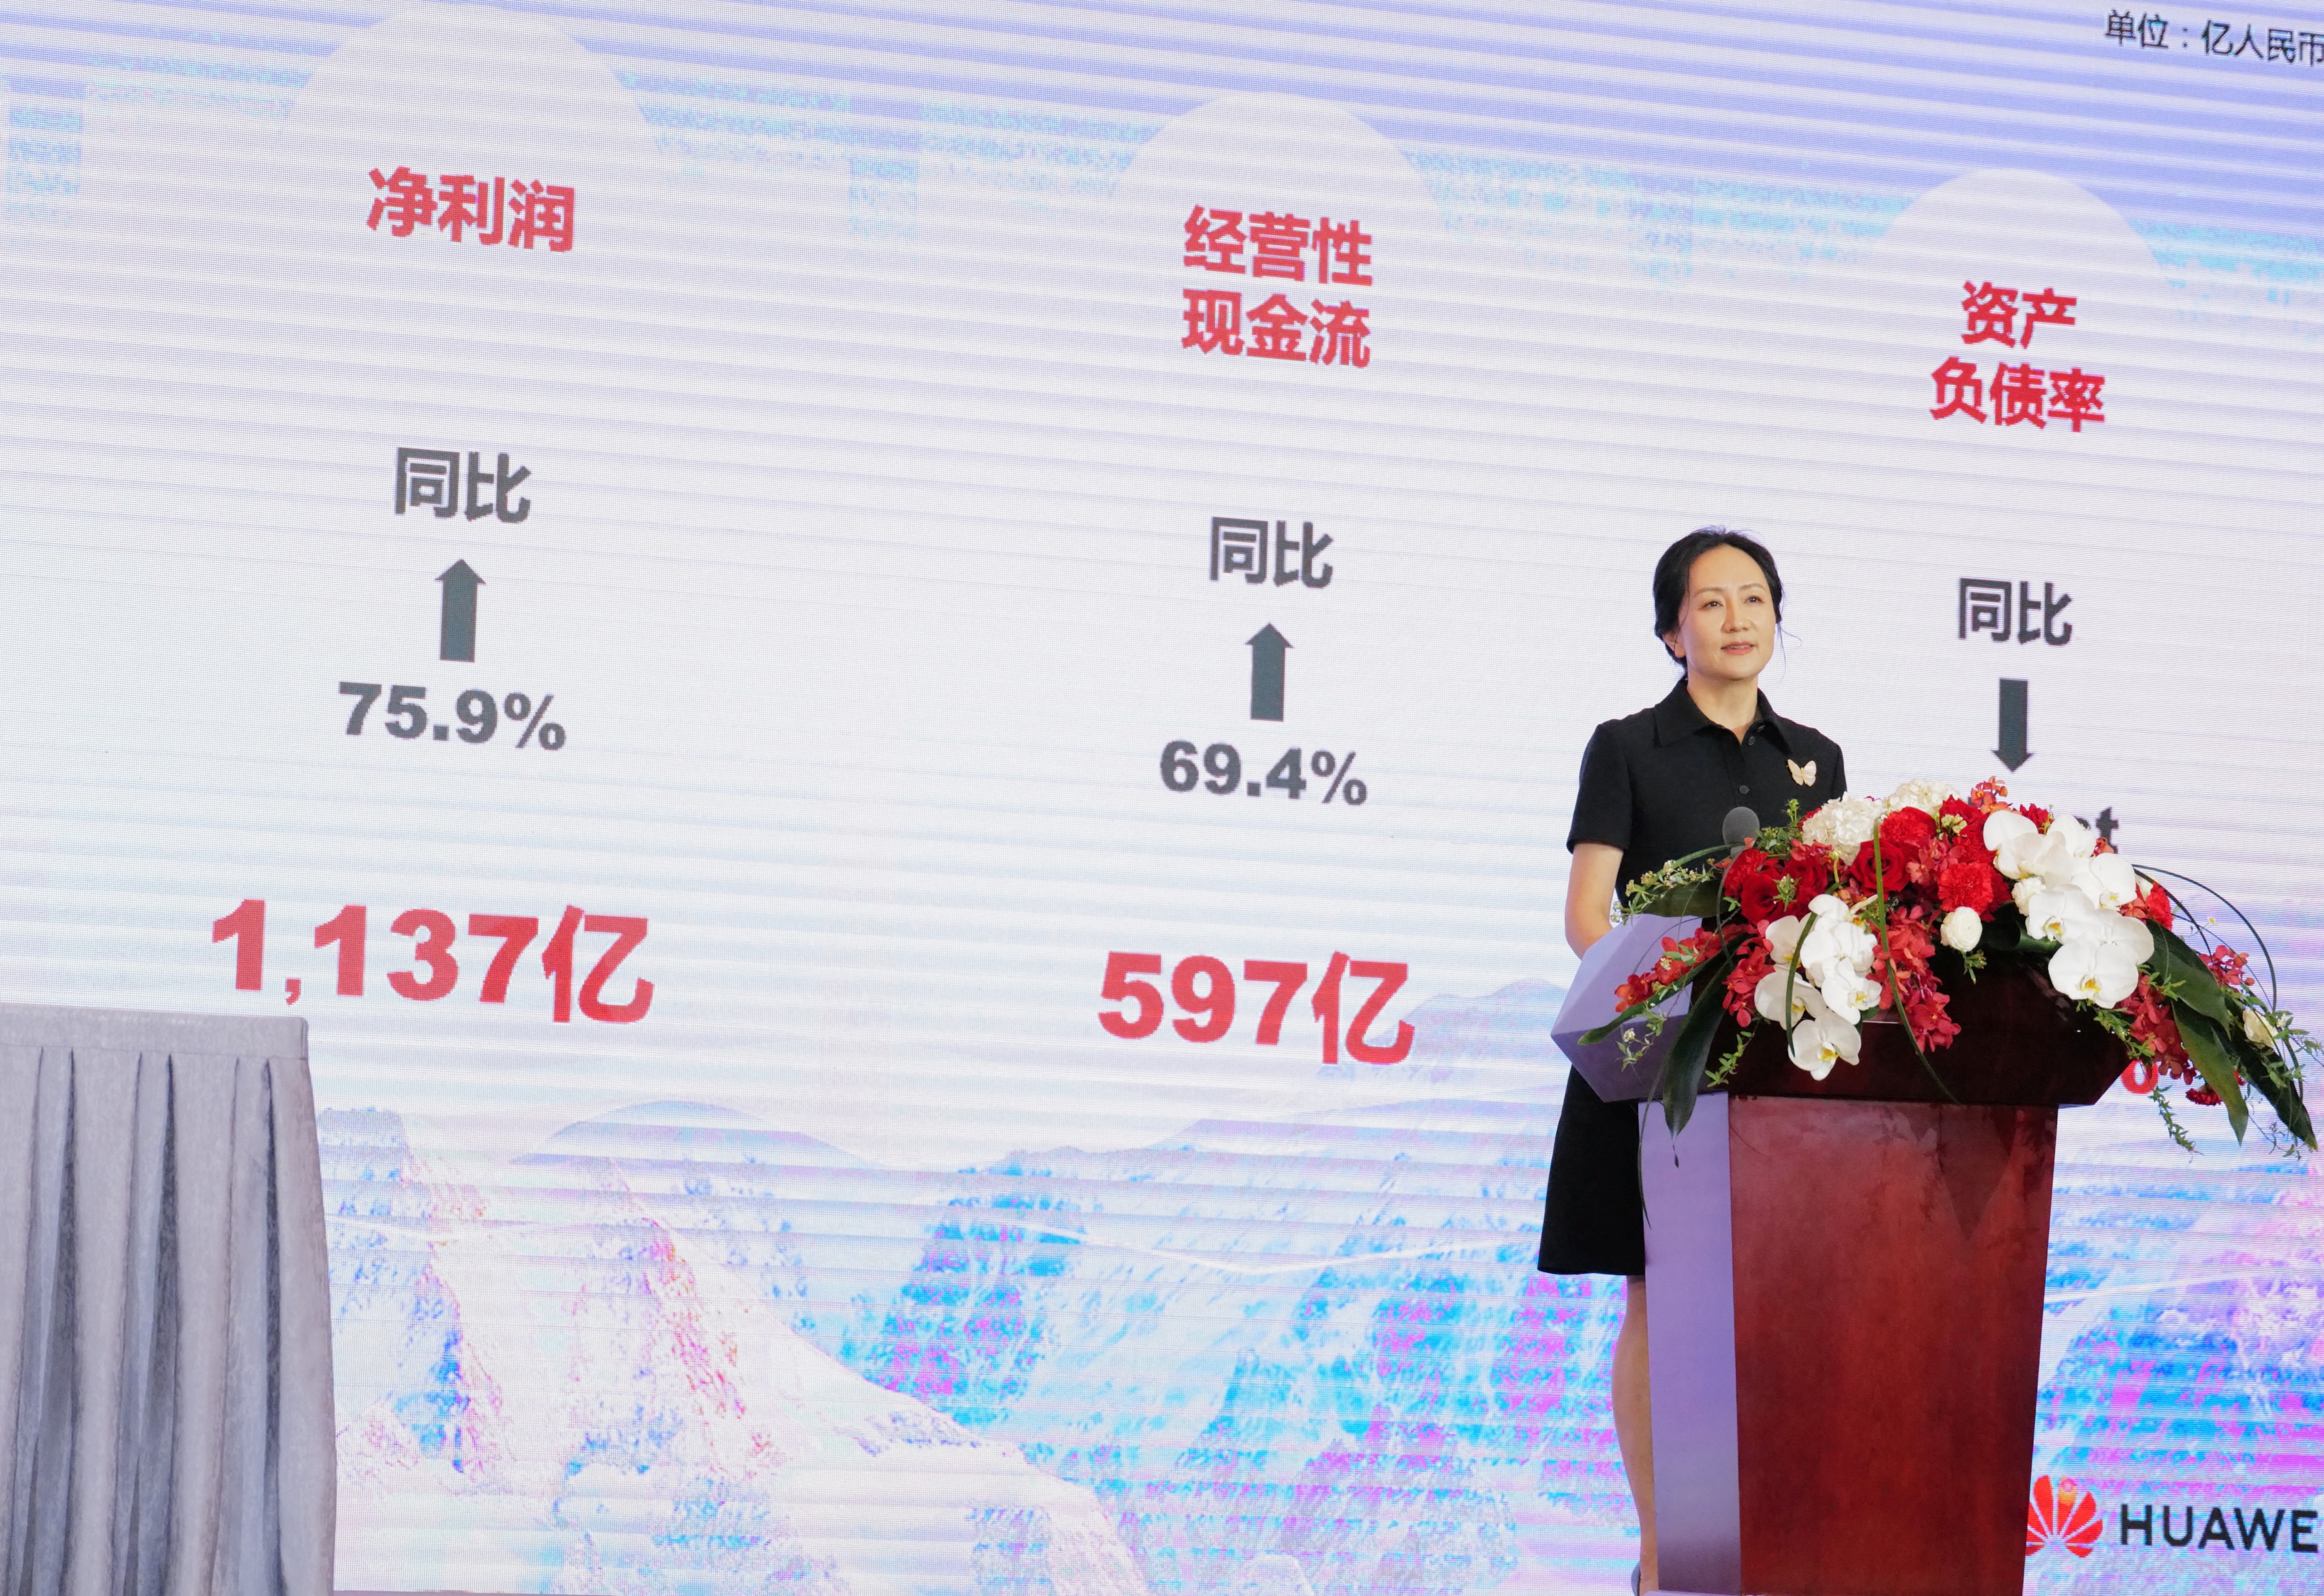 Huawei Chief Financial Officer Meng Wanzhou attends a news conference in Shenzhen